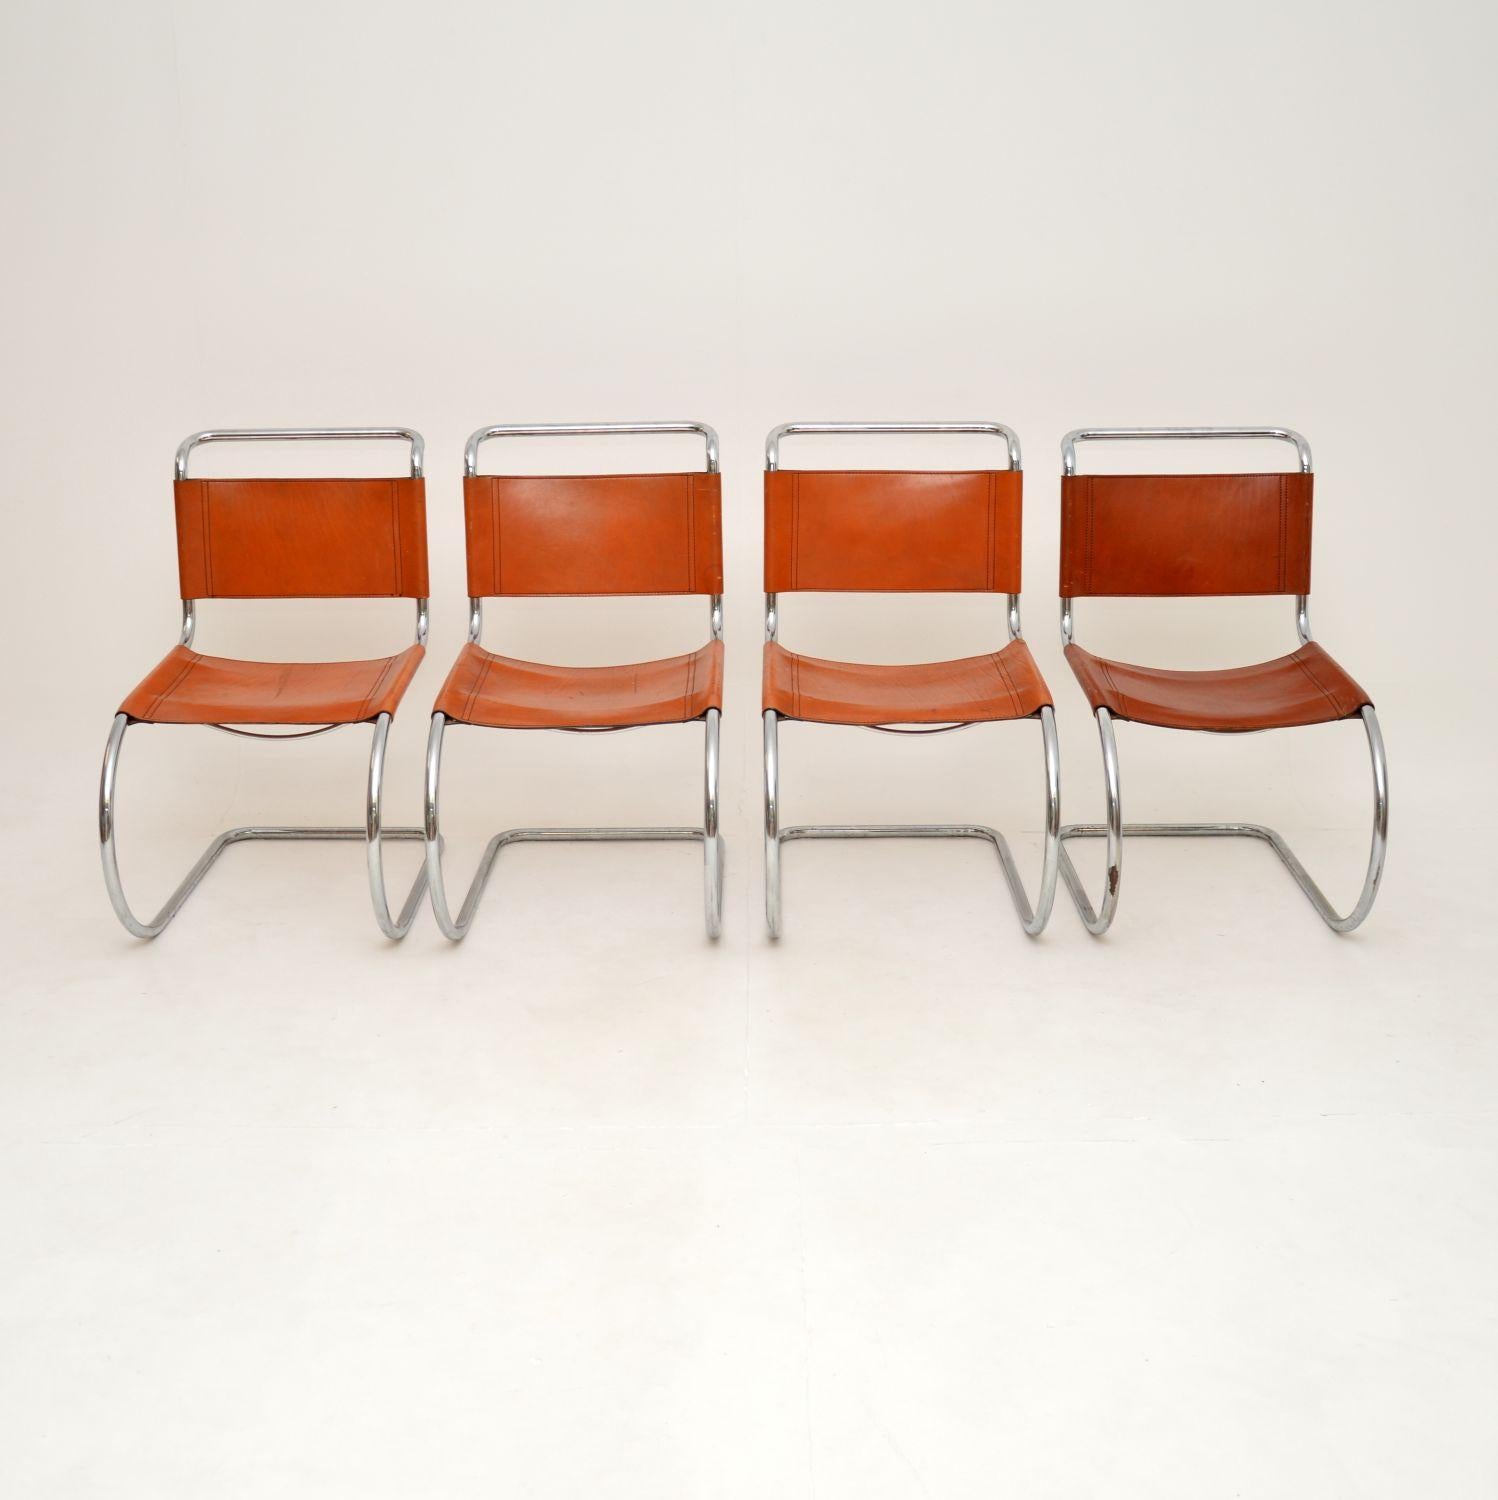 A fantastic set of four vintage leather and steel MR10 chairs by Mies Van Der Rohe. They were made in Italy by Fasem, they date from around the 1970’s.

The quality is outstanding, this is a stylish and iconic design that is also extremely